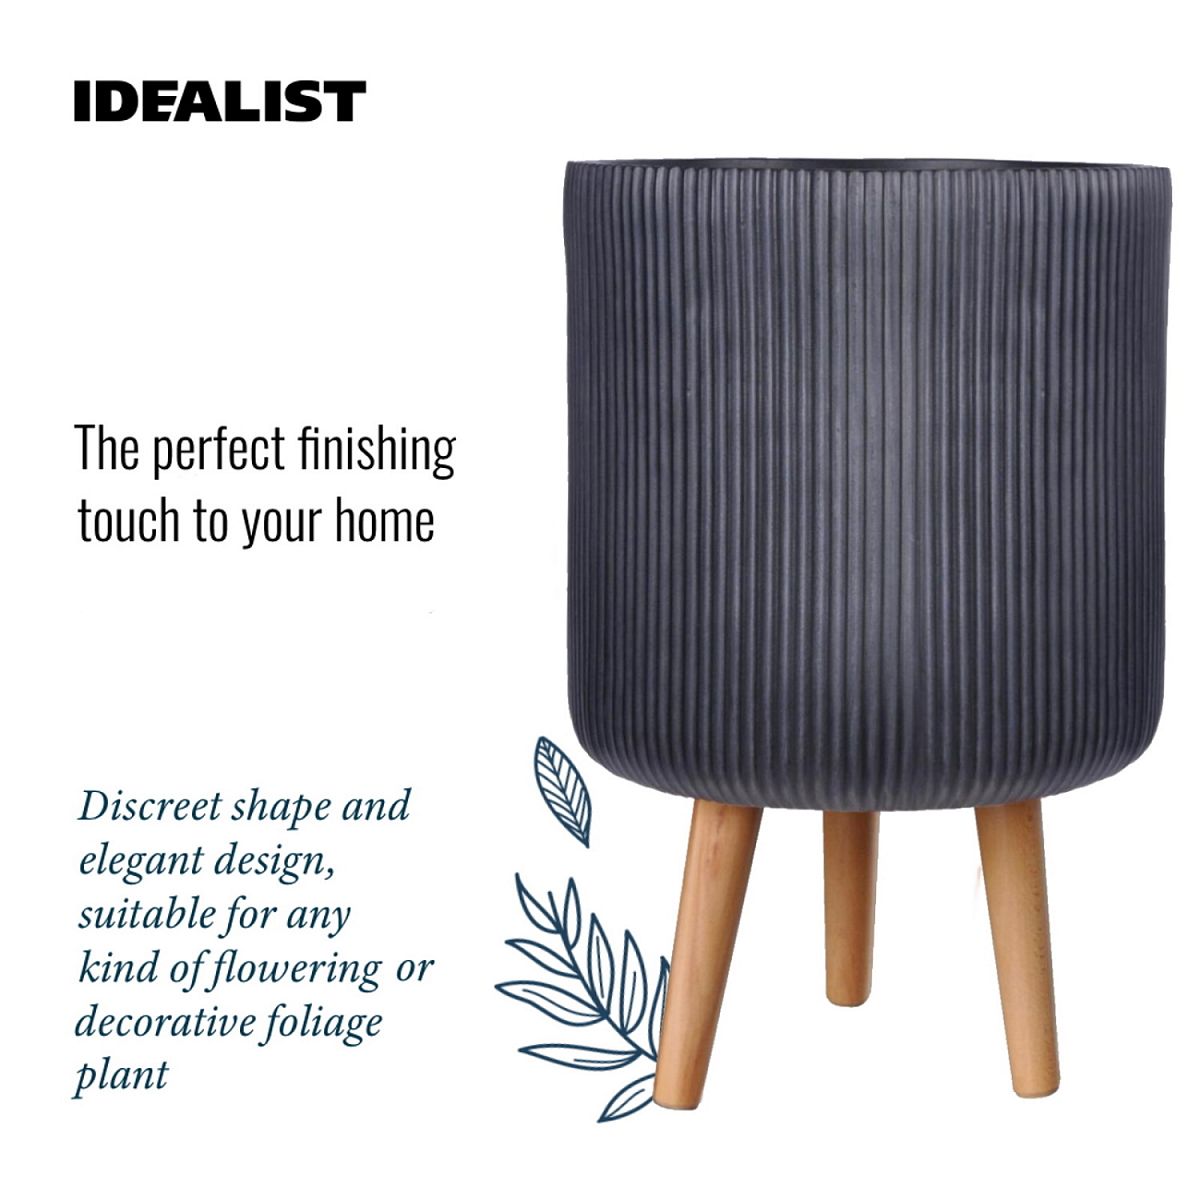 Ribbed Cylinder Indoor Planter on Legs by Idealist Lite